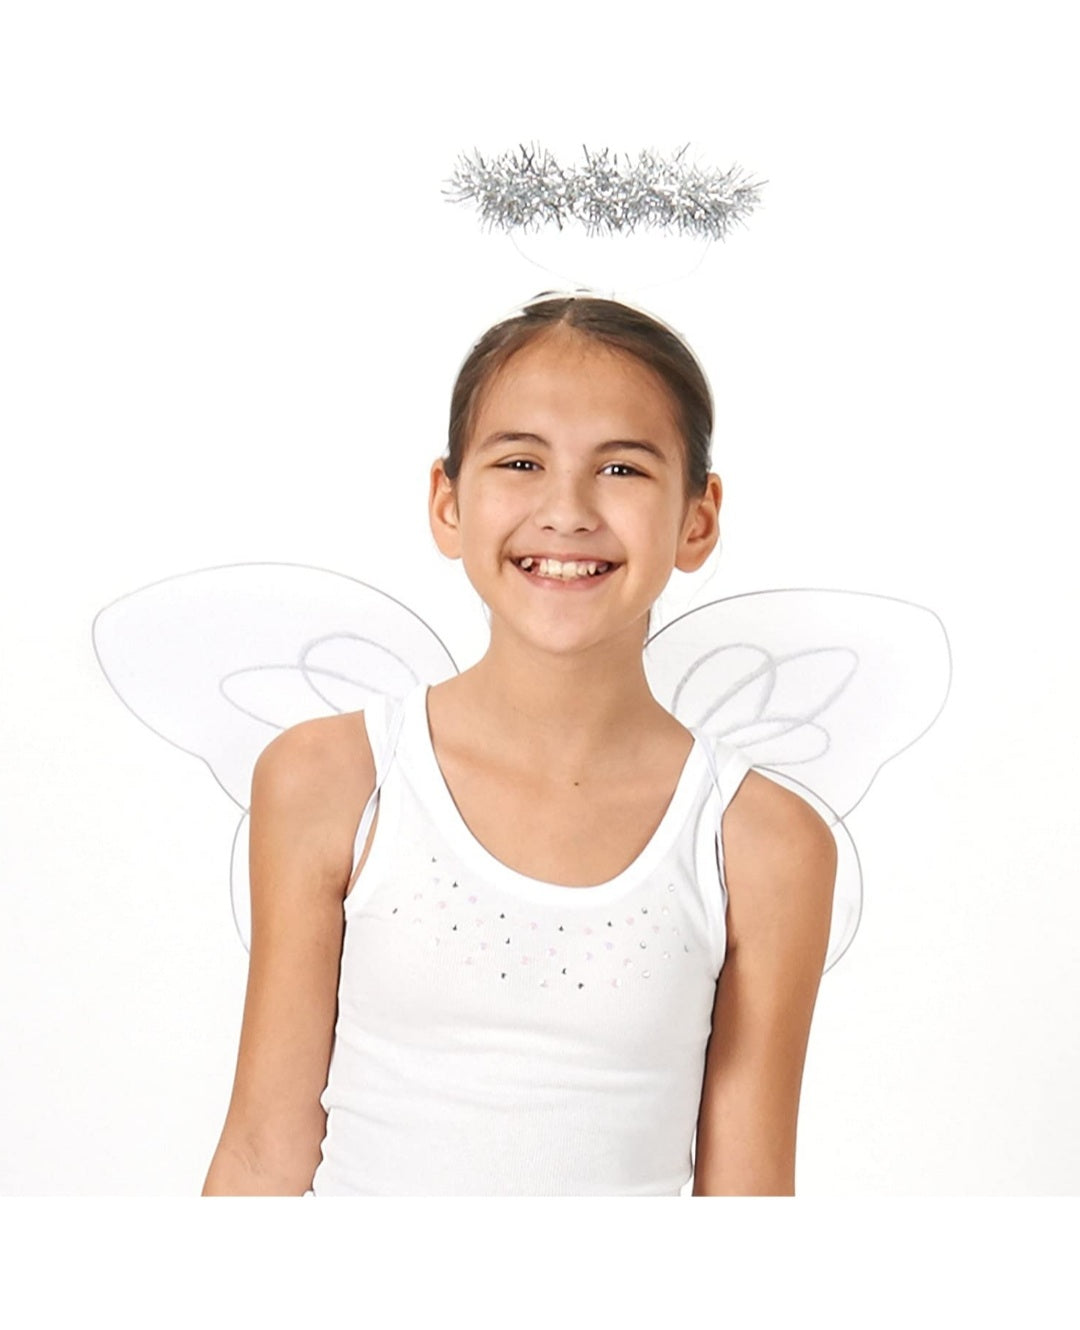 Angel Kit - Wings and Halo - White/Silver - Costume Accessories - Child